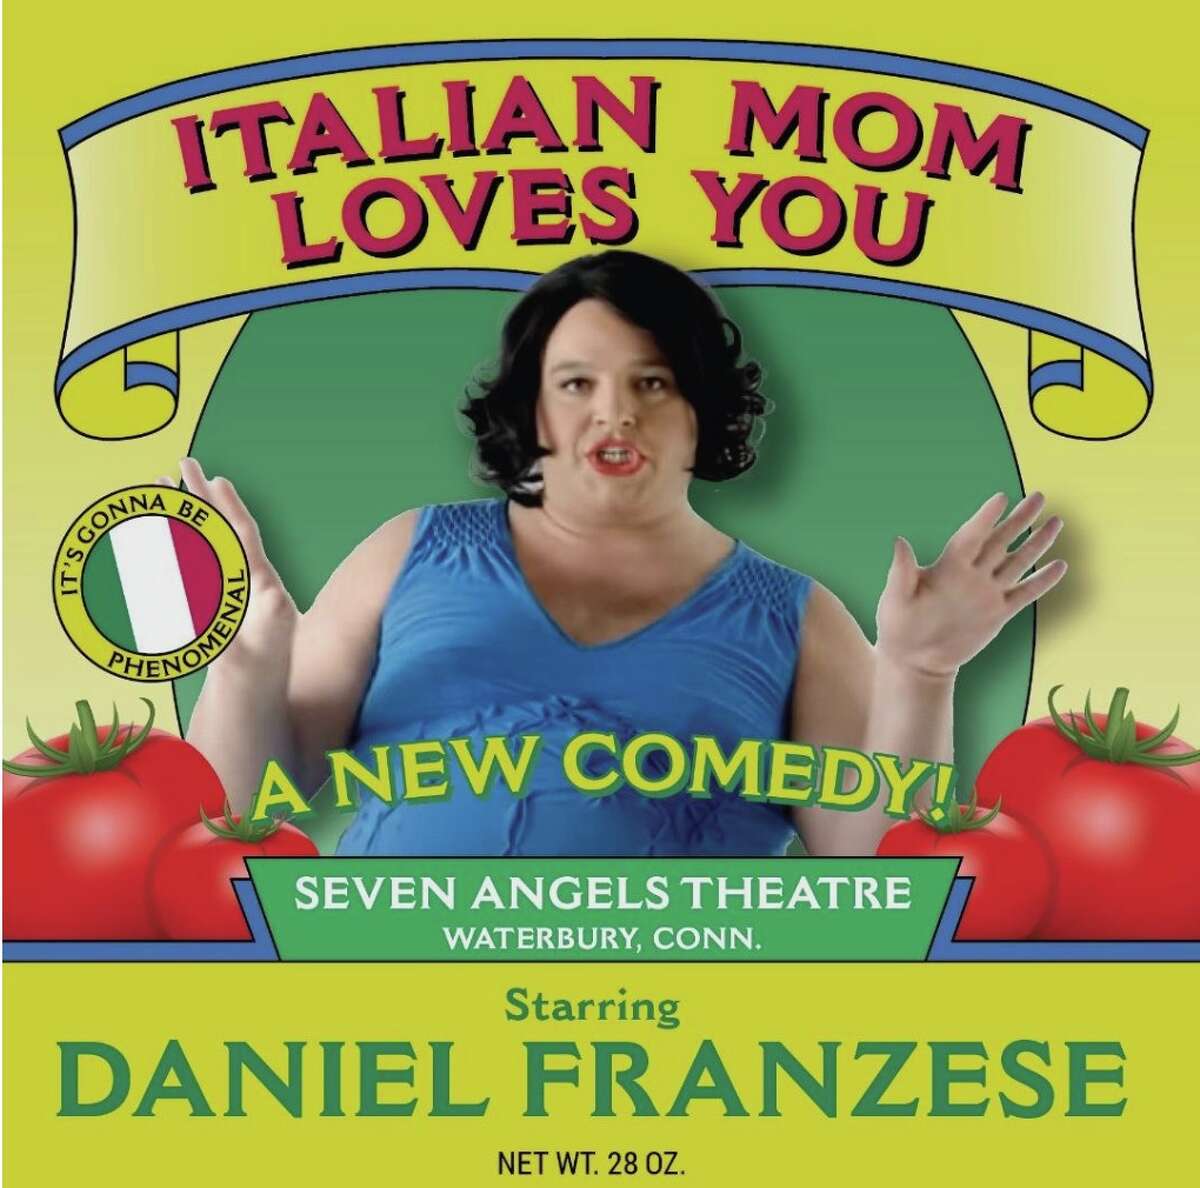 In partnership with Connecticut-based playwright Jacques Lamarre, Daniel Franzese's show, “Italian Mom Loves You,” opened Friday, Aug. 12, at the Seven Angels Theater in Waterbury. It runs through Aug. 21.